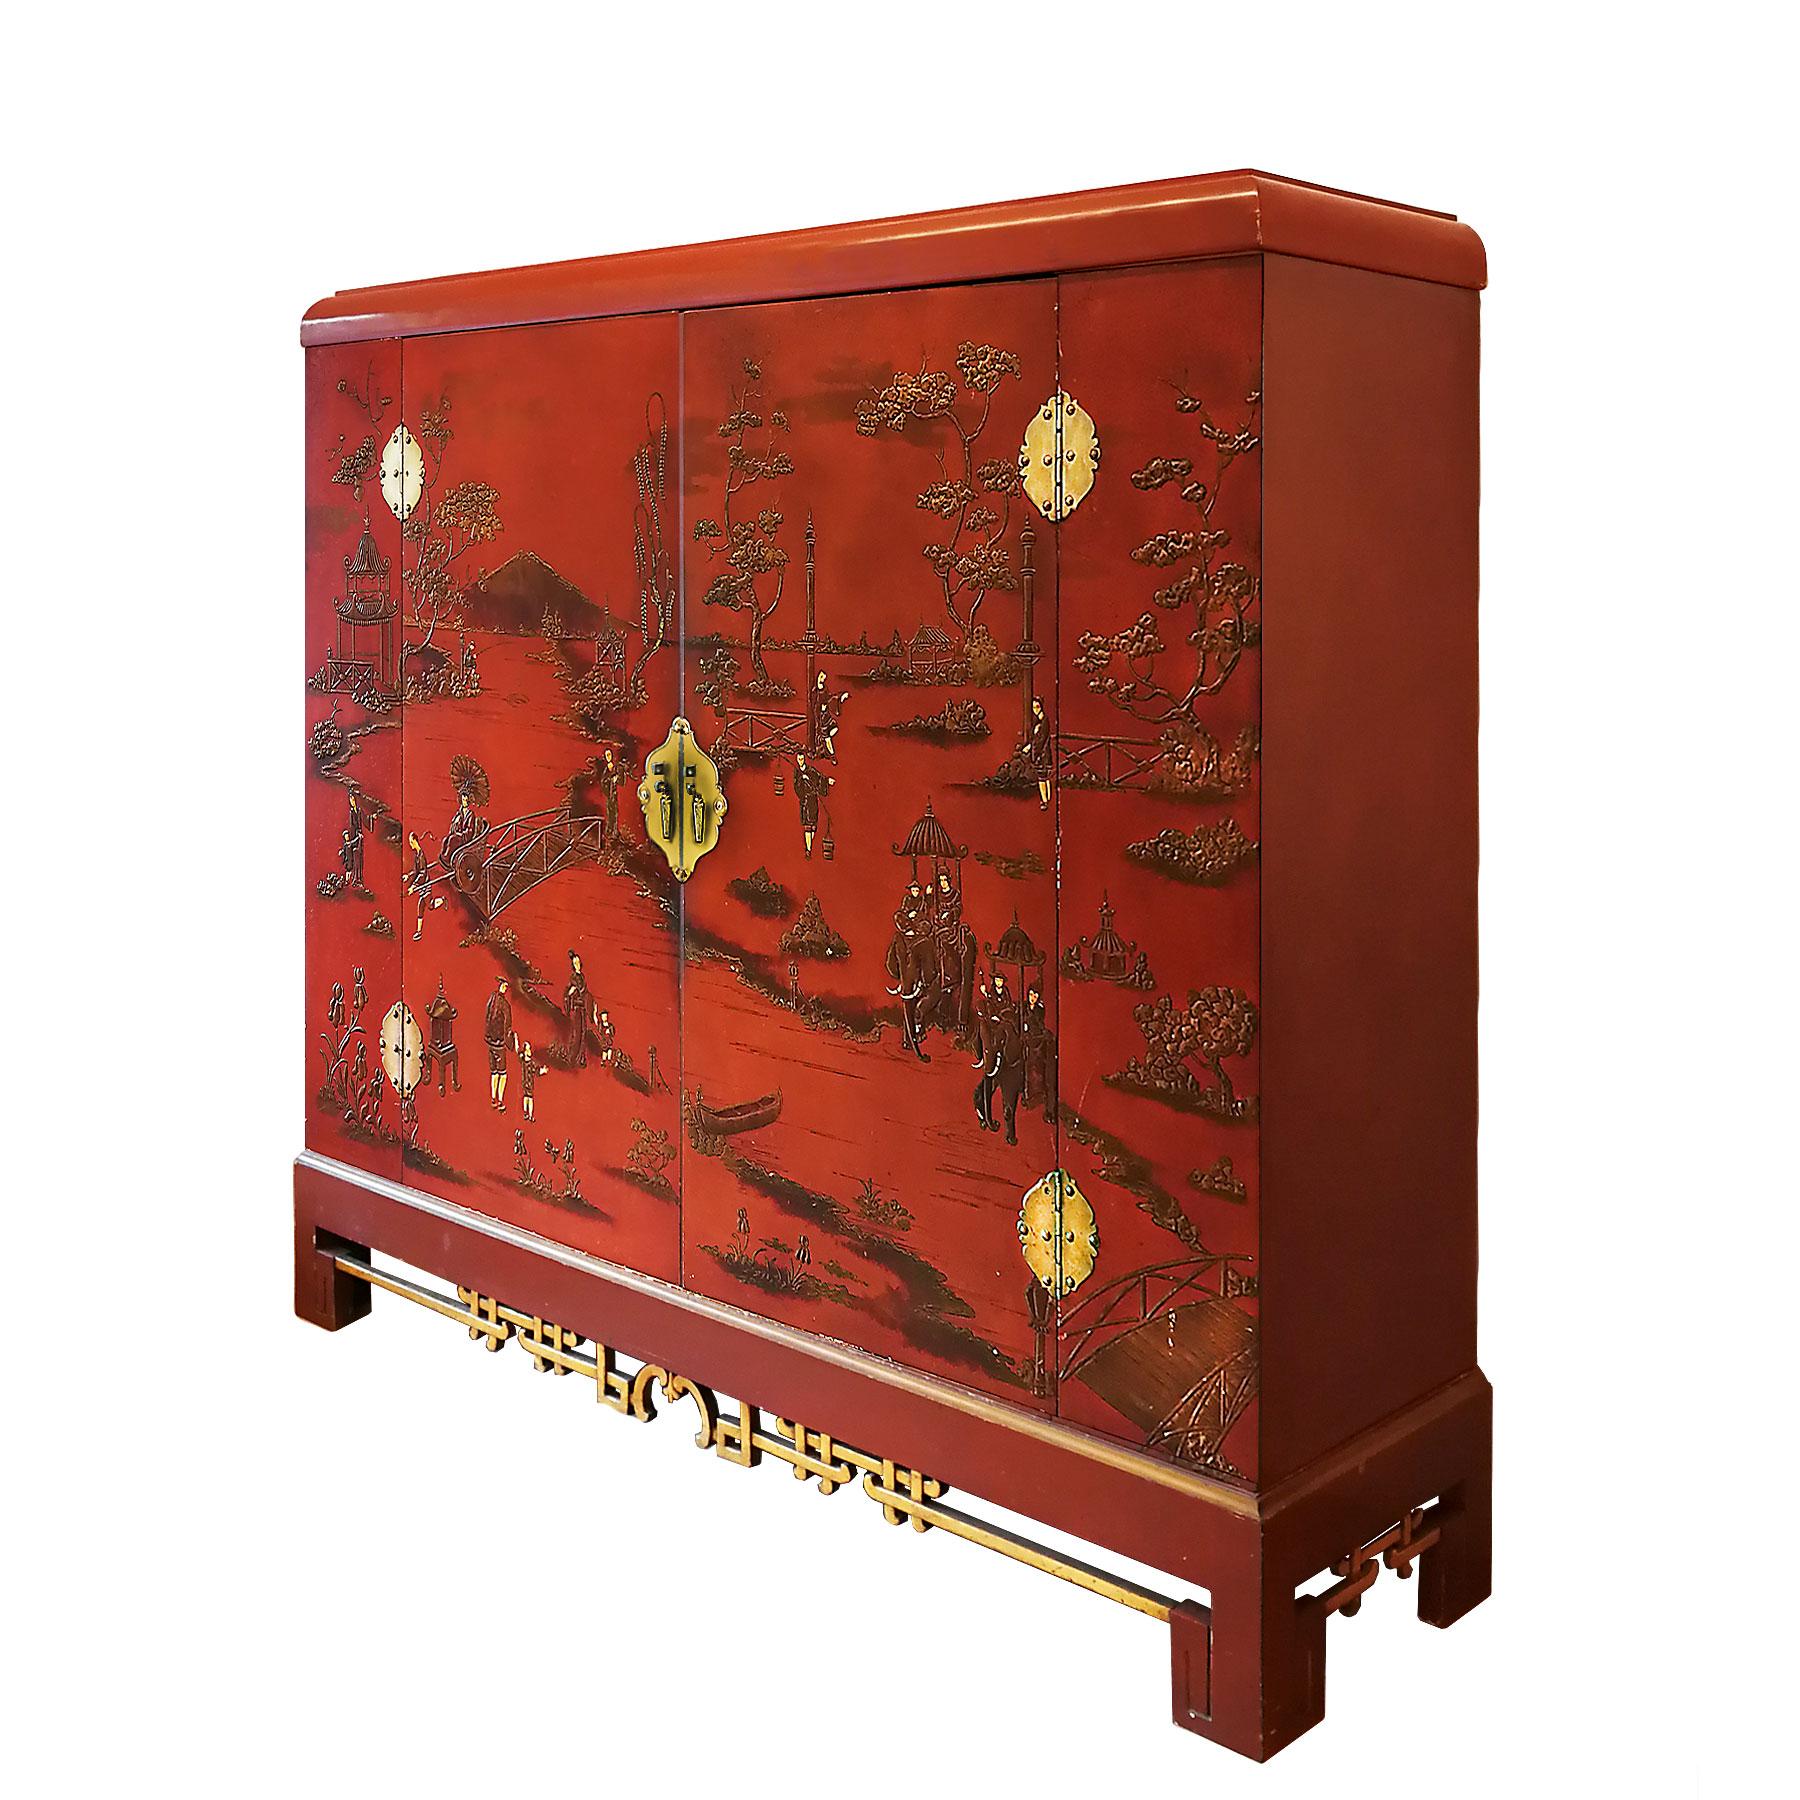 Large wardrobe, solid red lacquered wood with chinoiserie relief stucco and partially with golden leaf. Bird's-eye maple veneer inside and brass hardware. Can be completely dismantled. Original condition.
France, circa 1930.